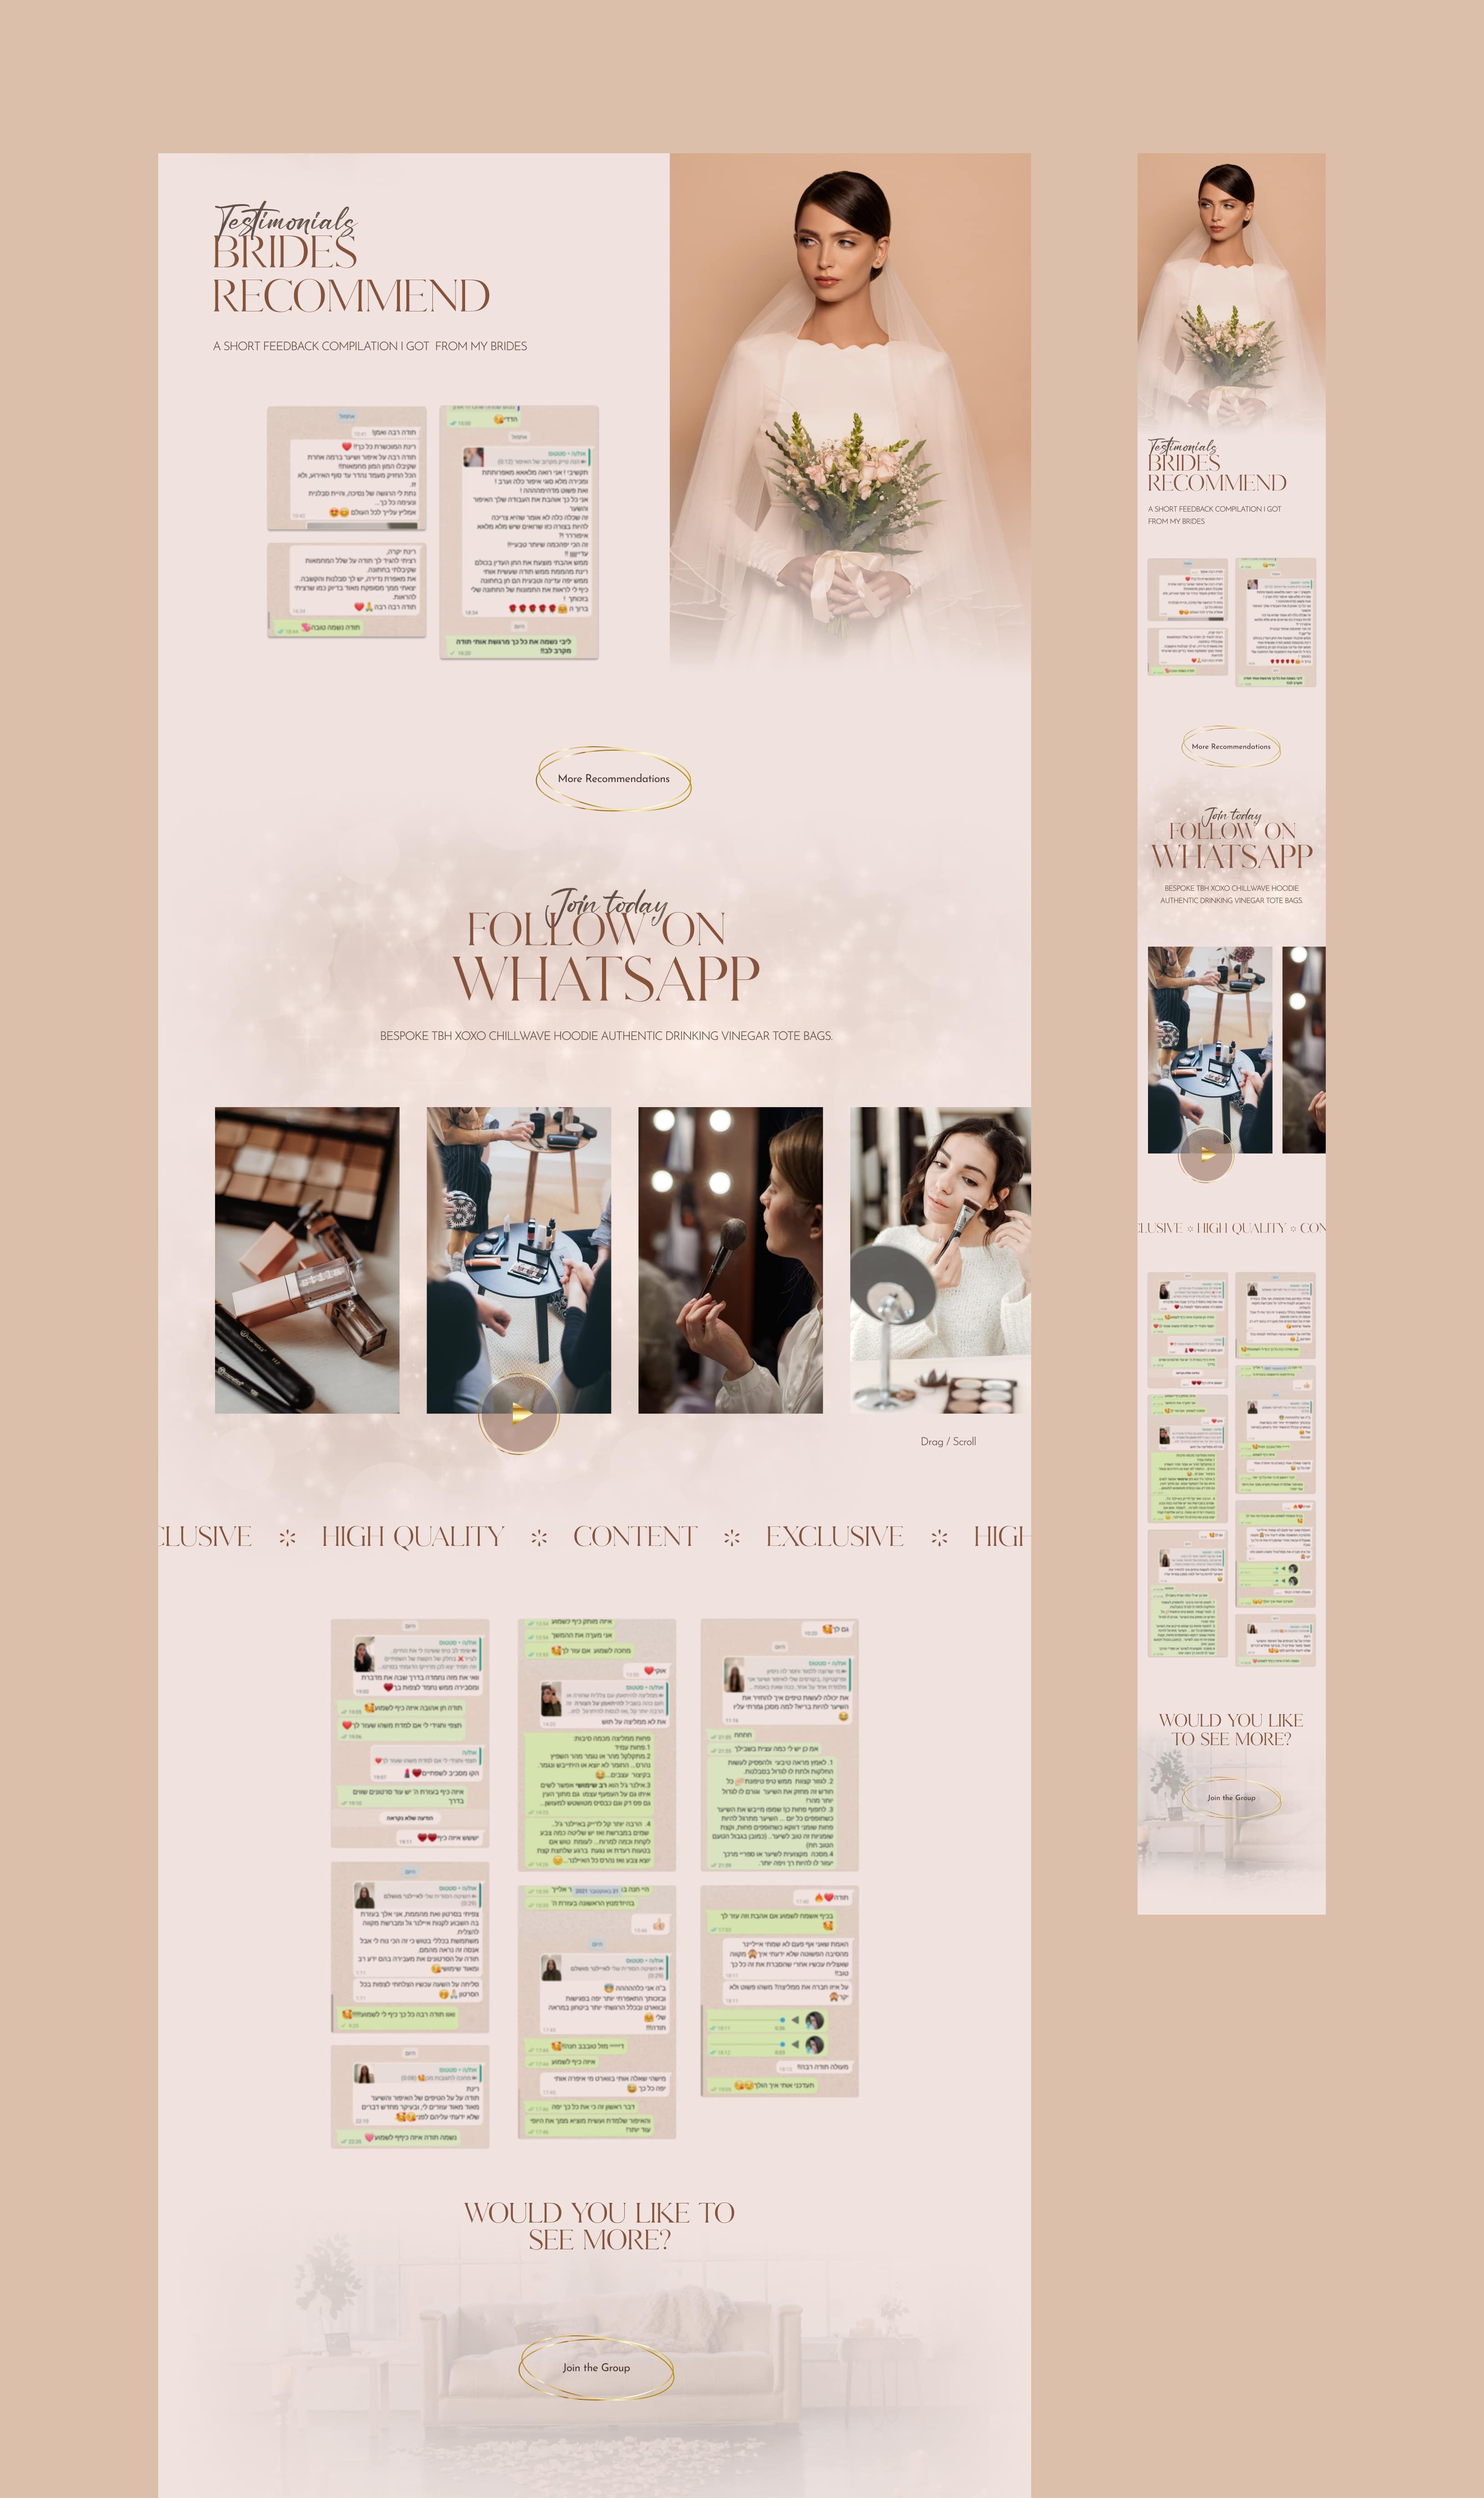 Wedding Makeup & Hair Artist responsive landing page view for sections: testimonials & join whatsapp group